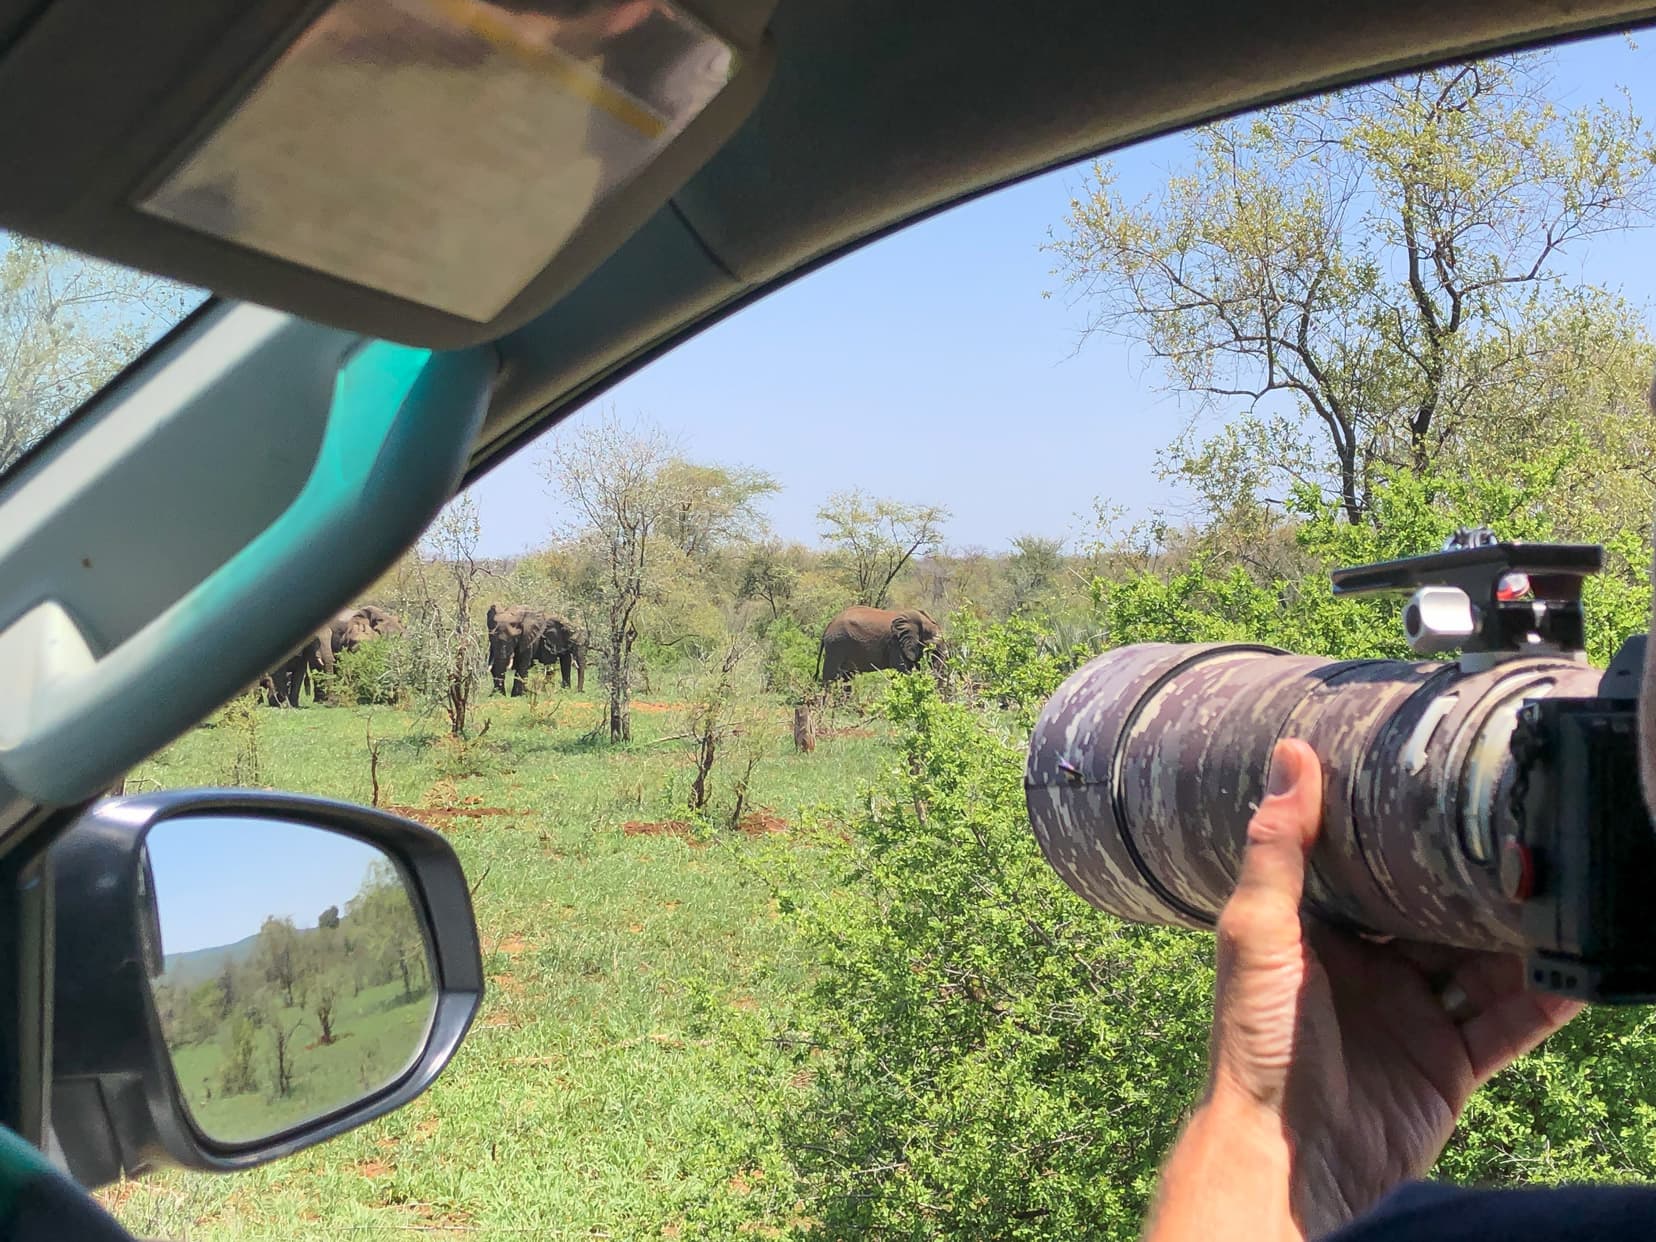 Taking photography shots from the car with a zoom lens of elephants in the distance 